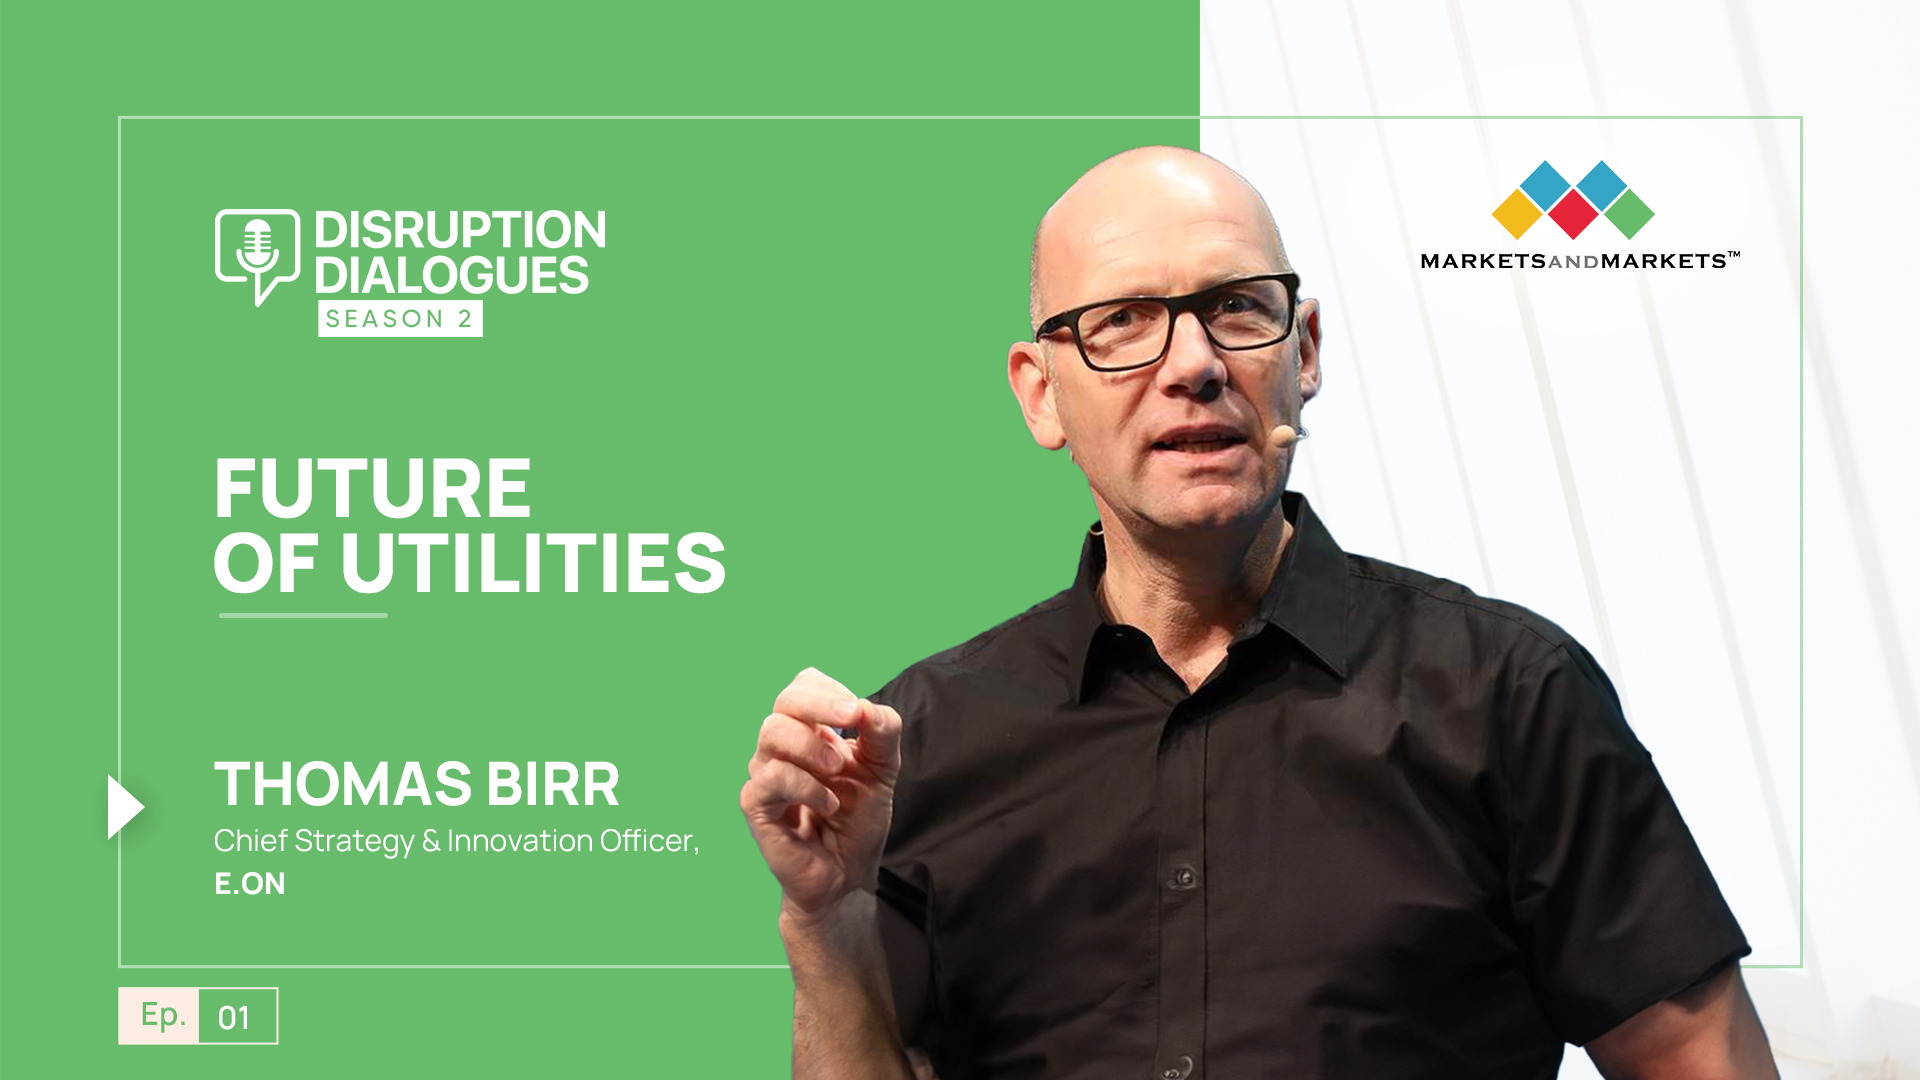 Future of Utilities with Thomas Birr from E.ON